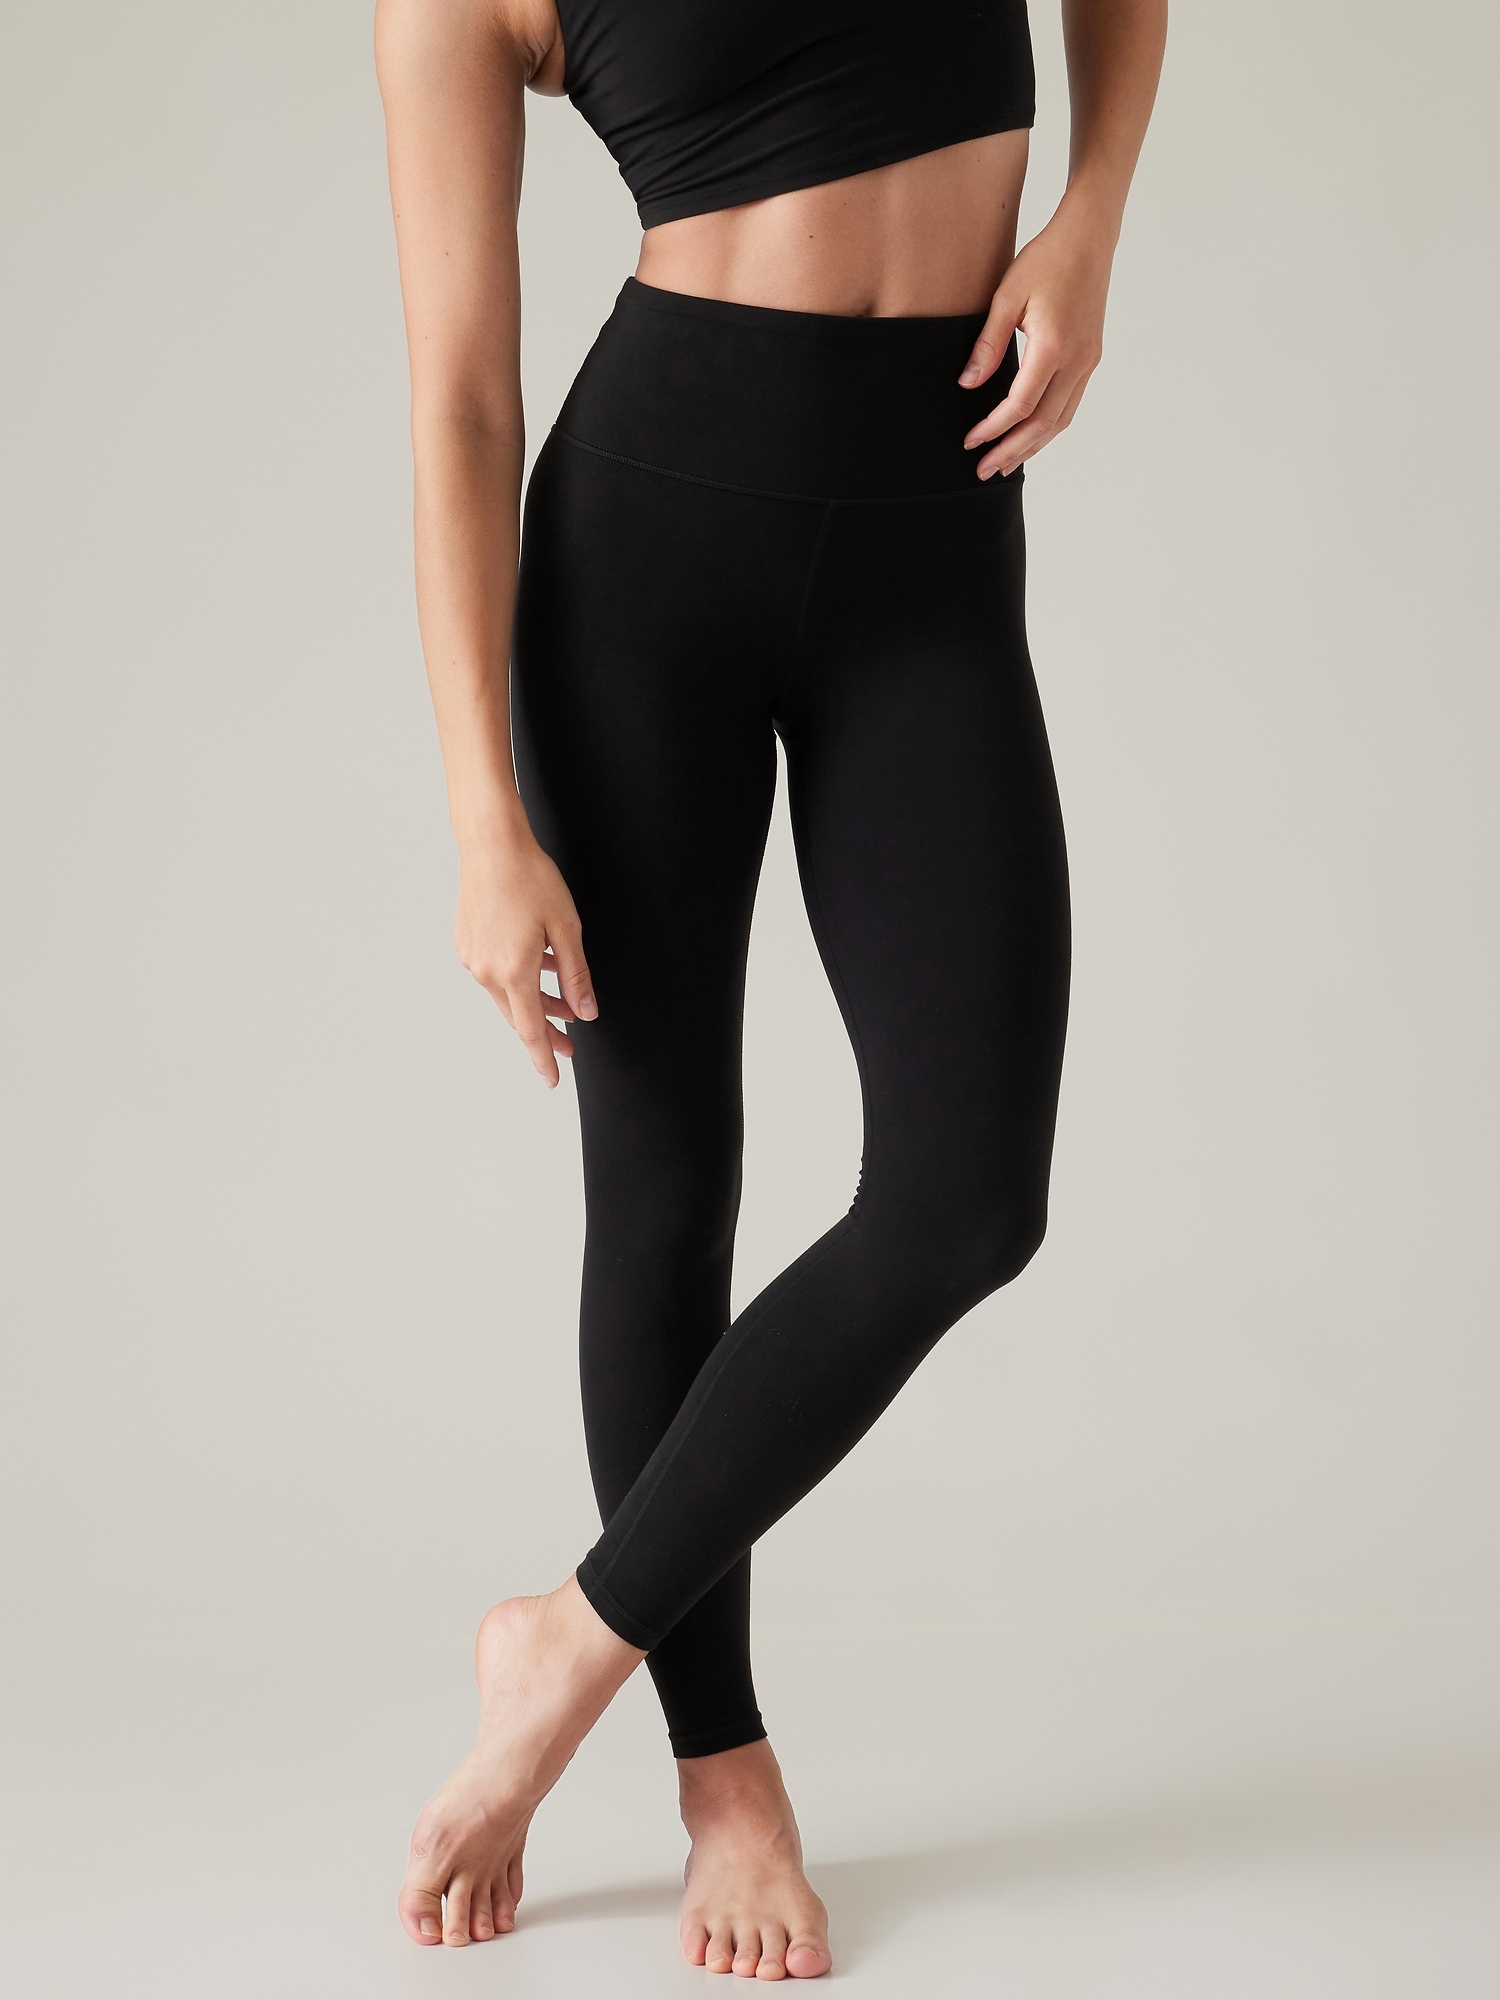 15 Leggings for Tall Women to Shop Now | Who What Wear